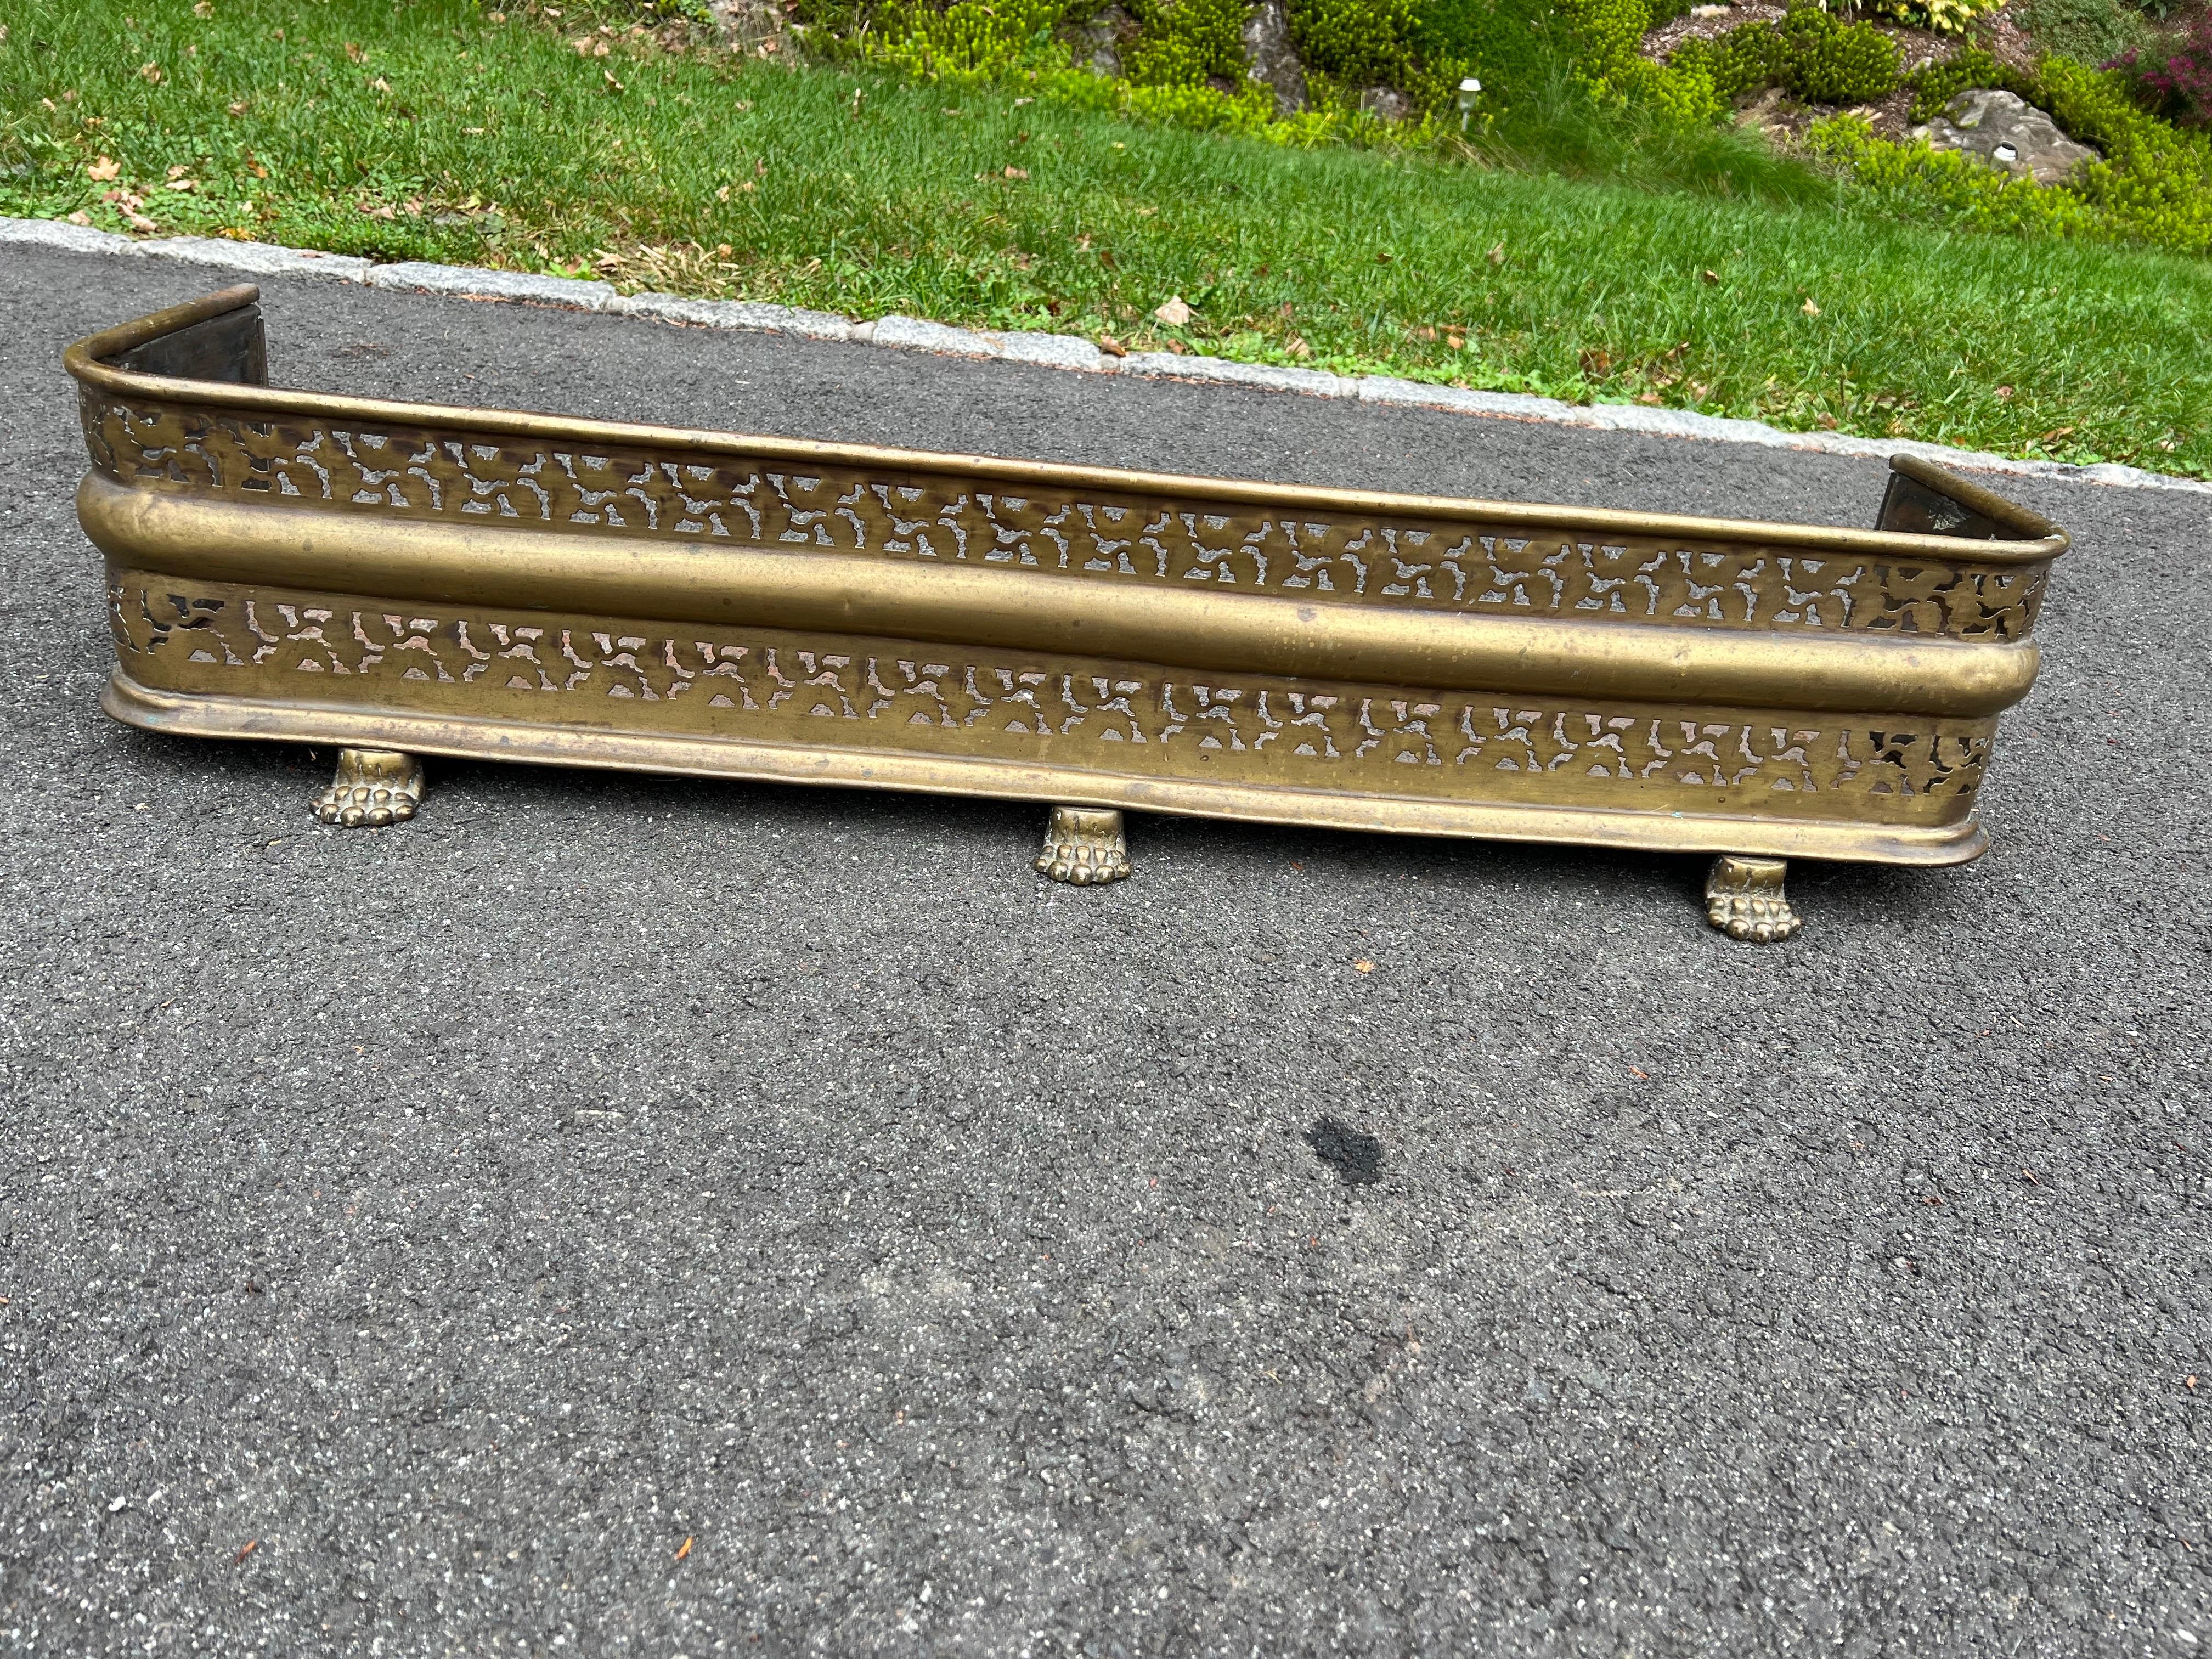 19th Century Pierced Brass Fireplace Fender. Classic lion paw feet with pierced reticulated floral design. George III style.